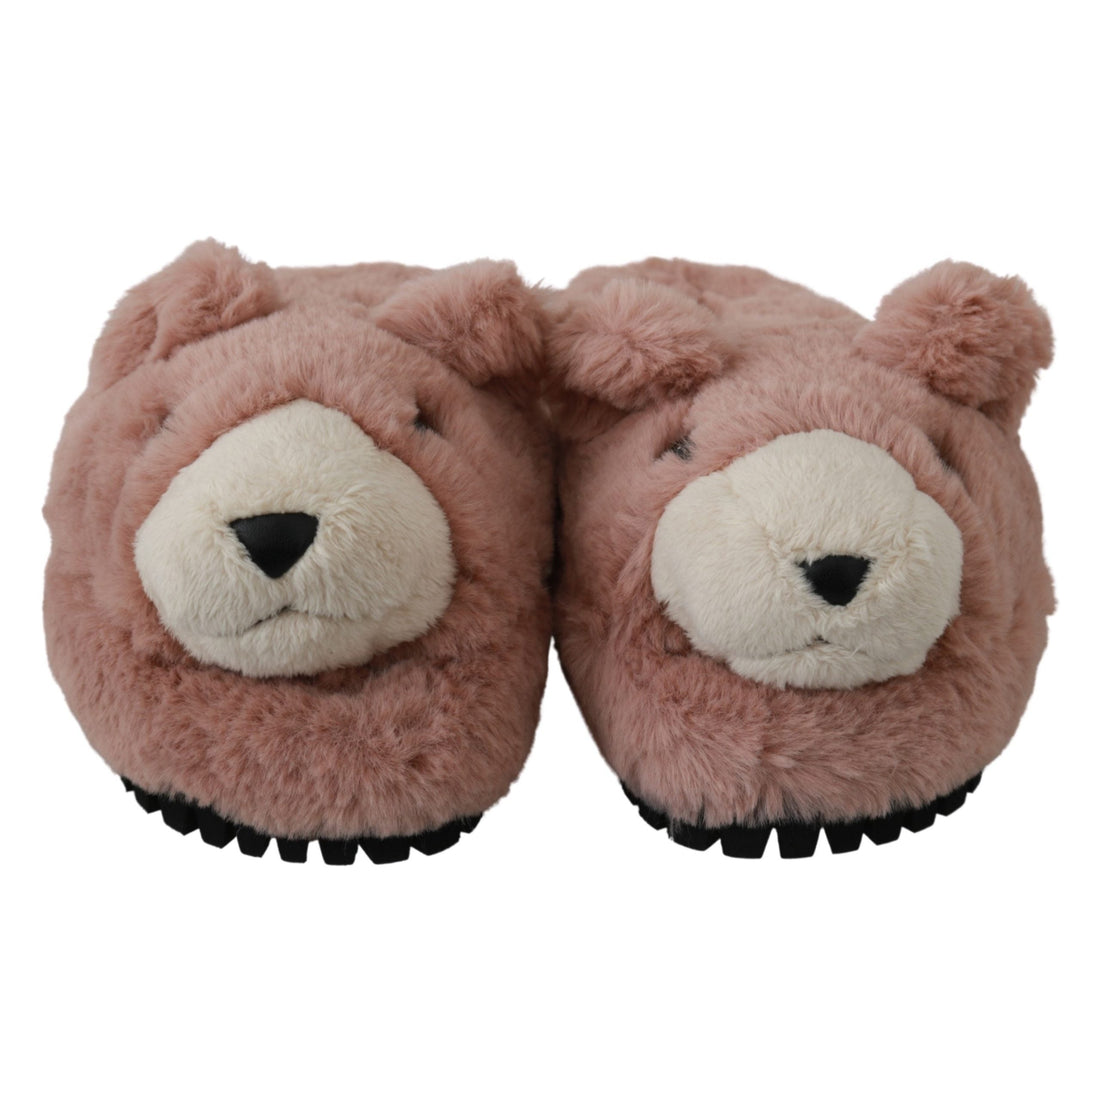 Dolce & Gabbana Pink Bear House Slippers Sandals Shoes - Paris Deluxe